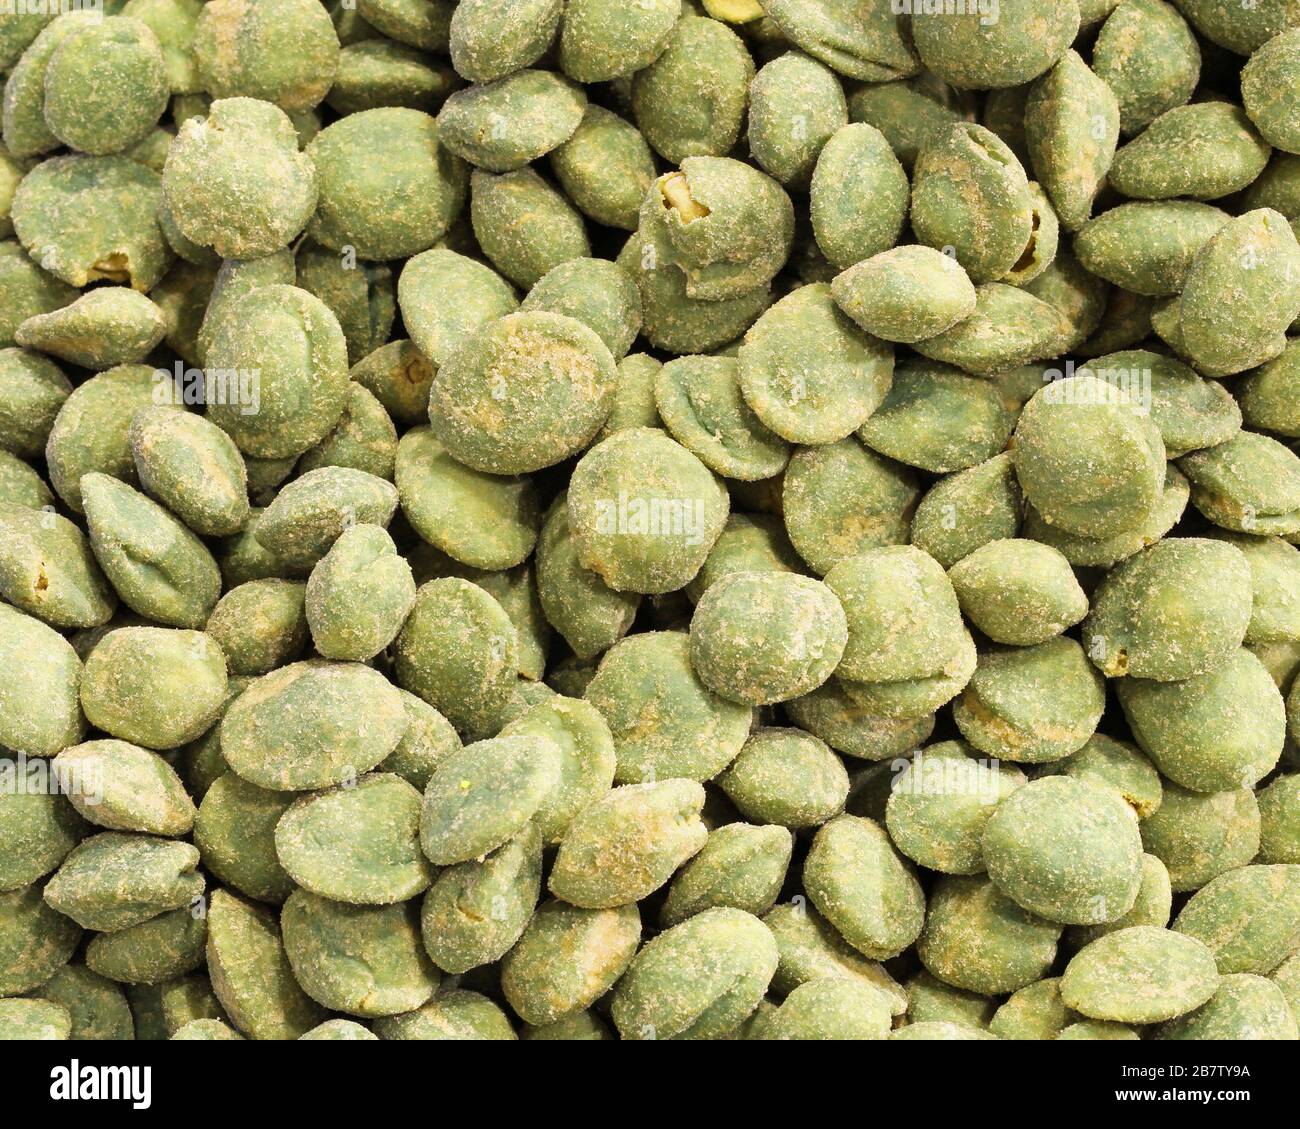 green wasabi seeds a plant native to Japan Stock Photo - Alamy